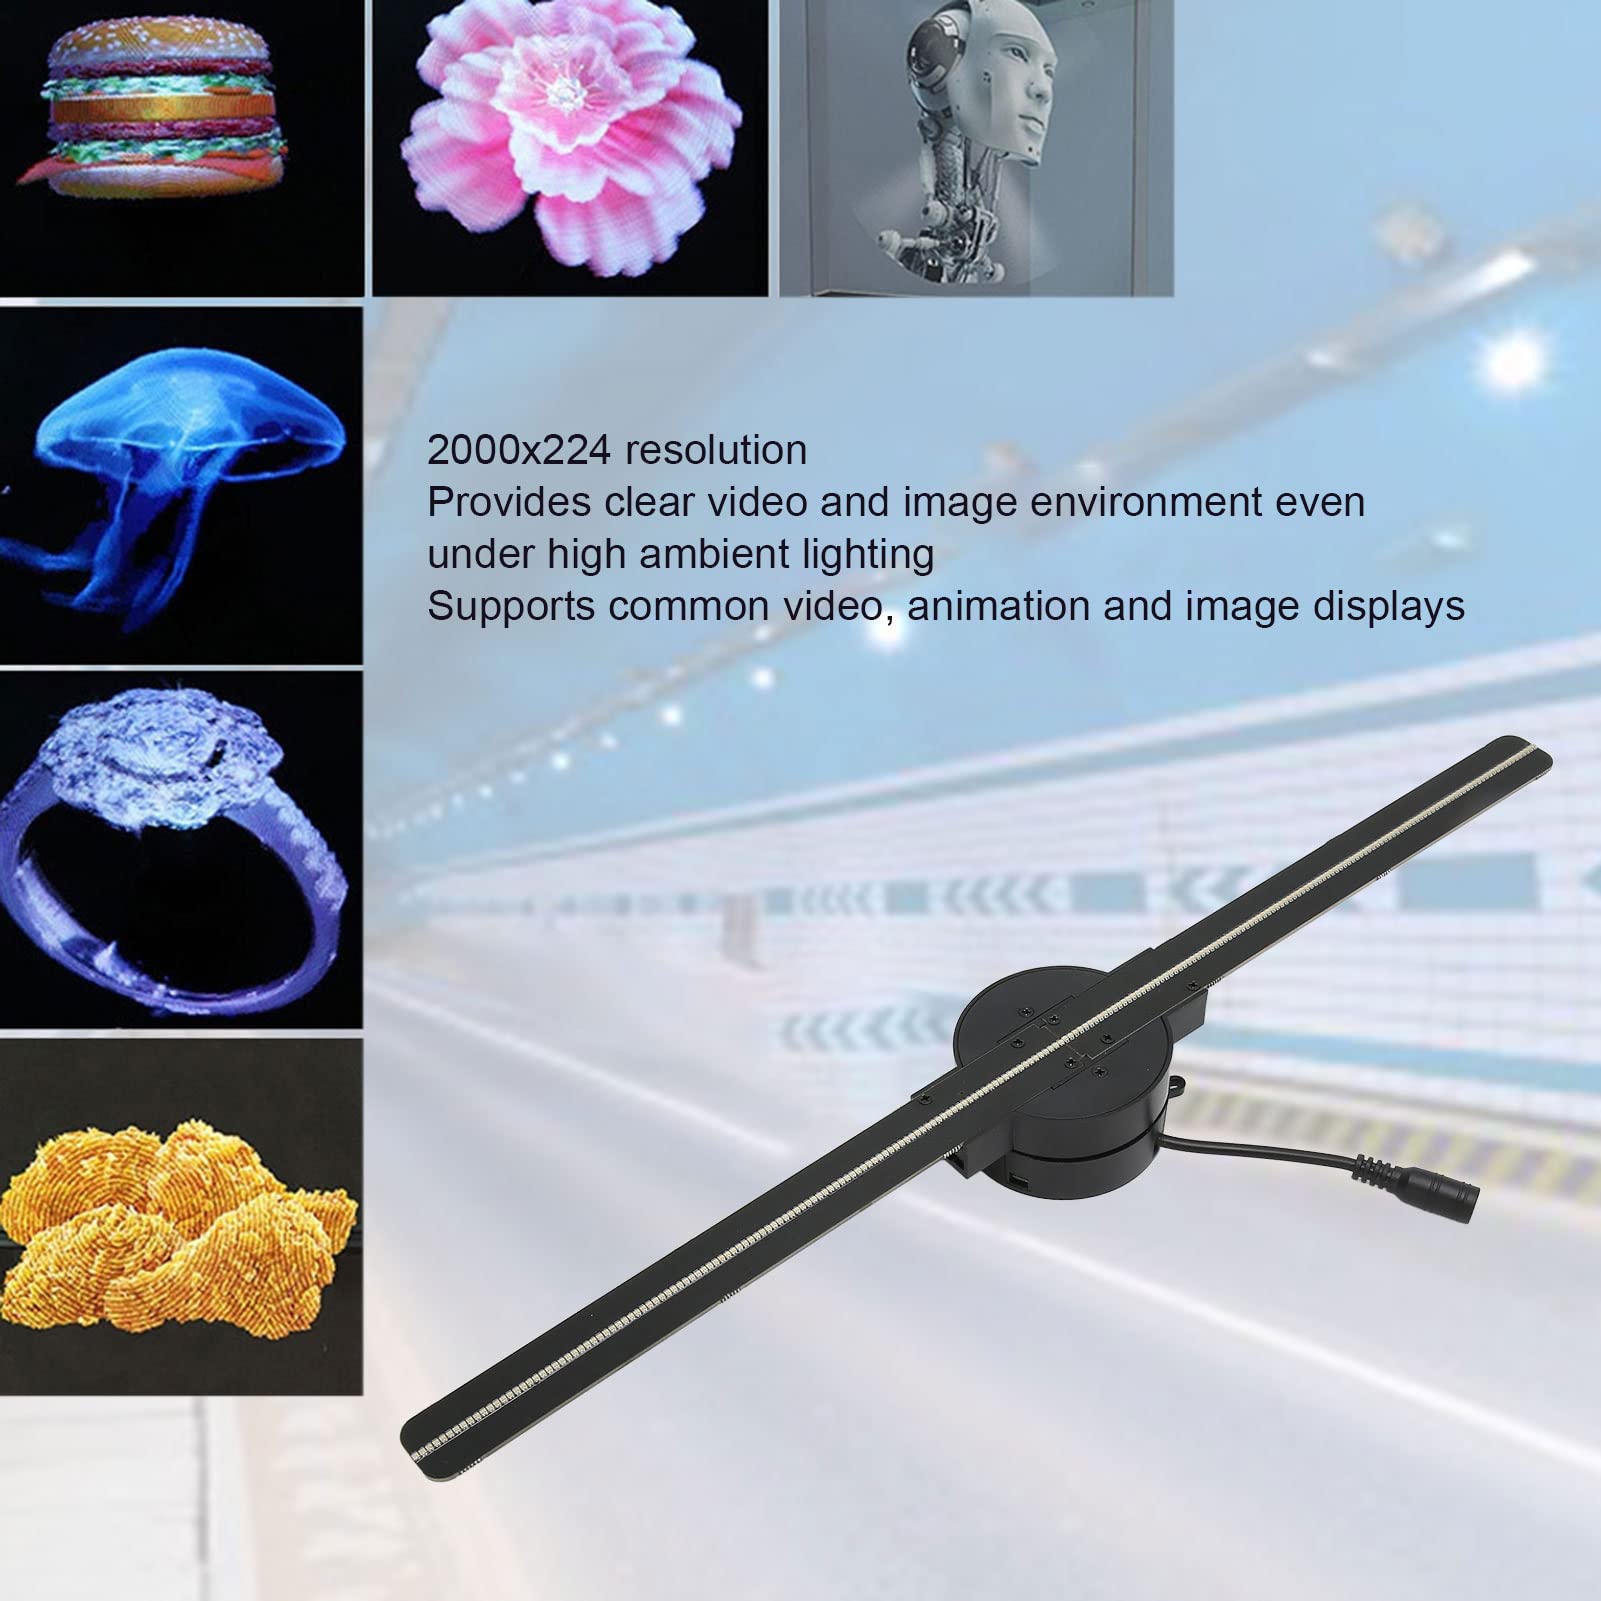 3D Hologram Fan, 16.5in WiFi 3D Hologram Projector Advertising Display With 224 LED Light Beads Holographic Video Projector for Business Store Signs, Bar, Casino, Party, Christmas